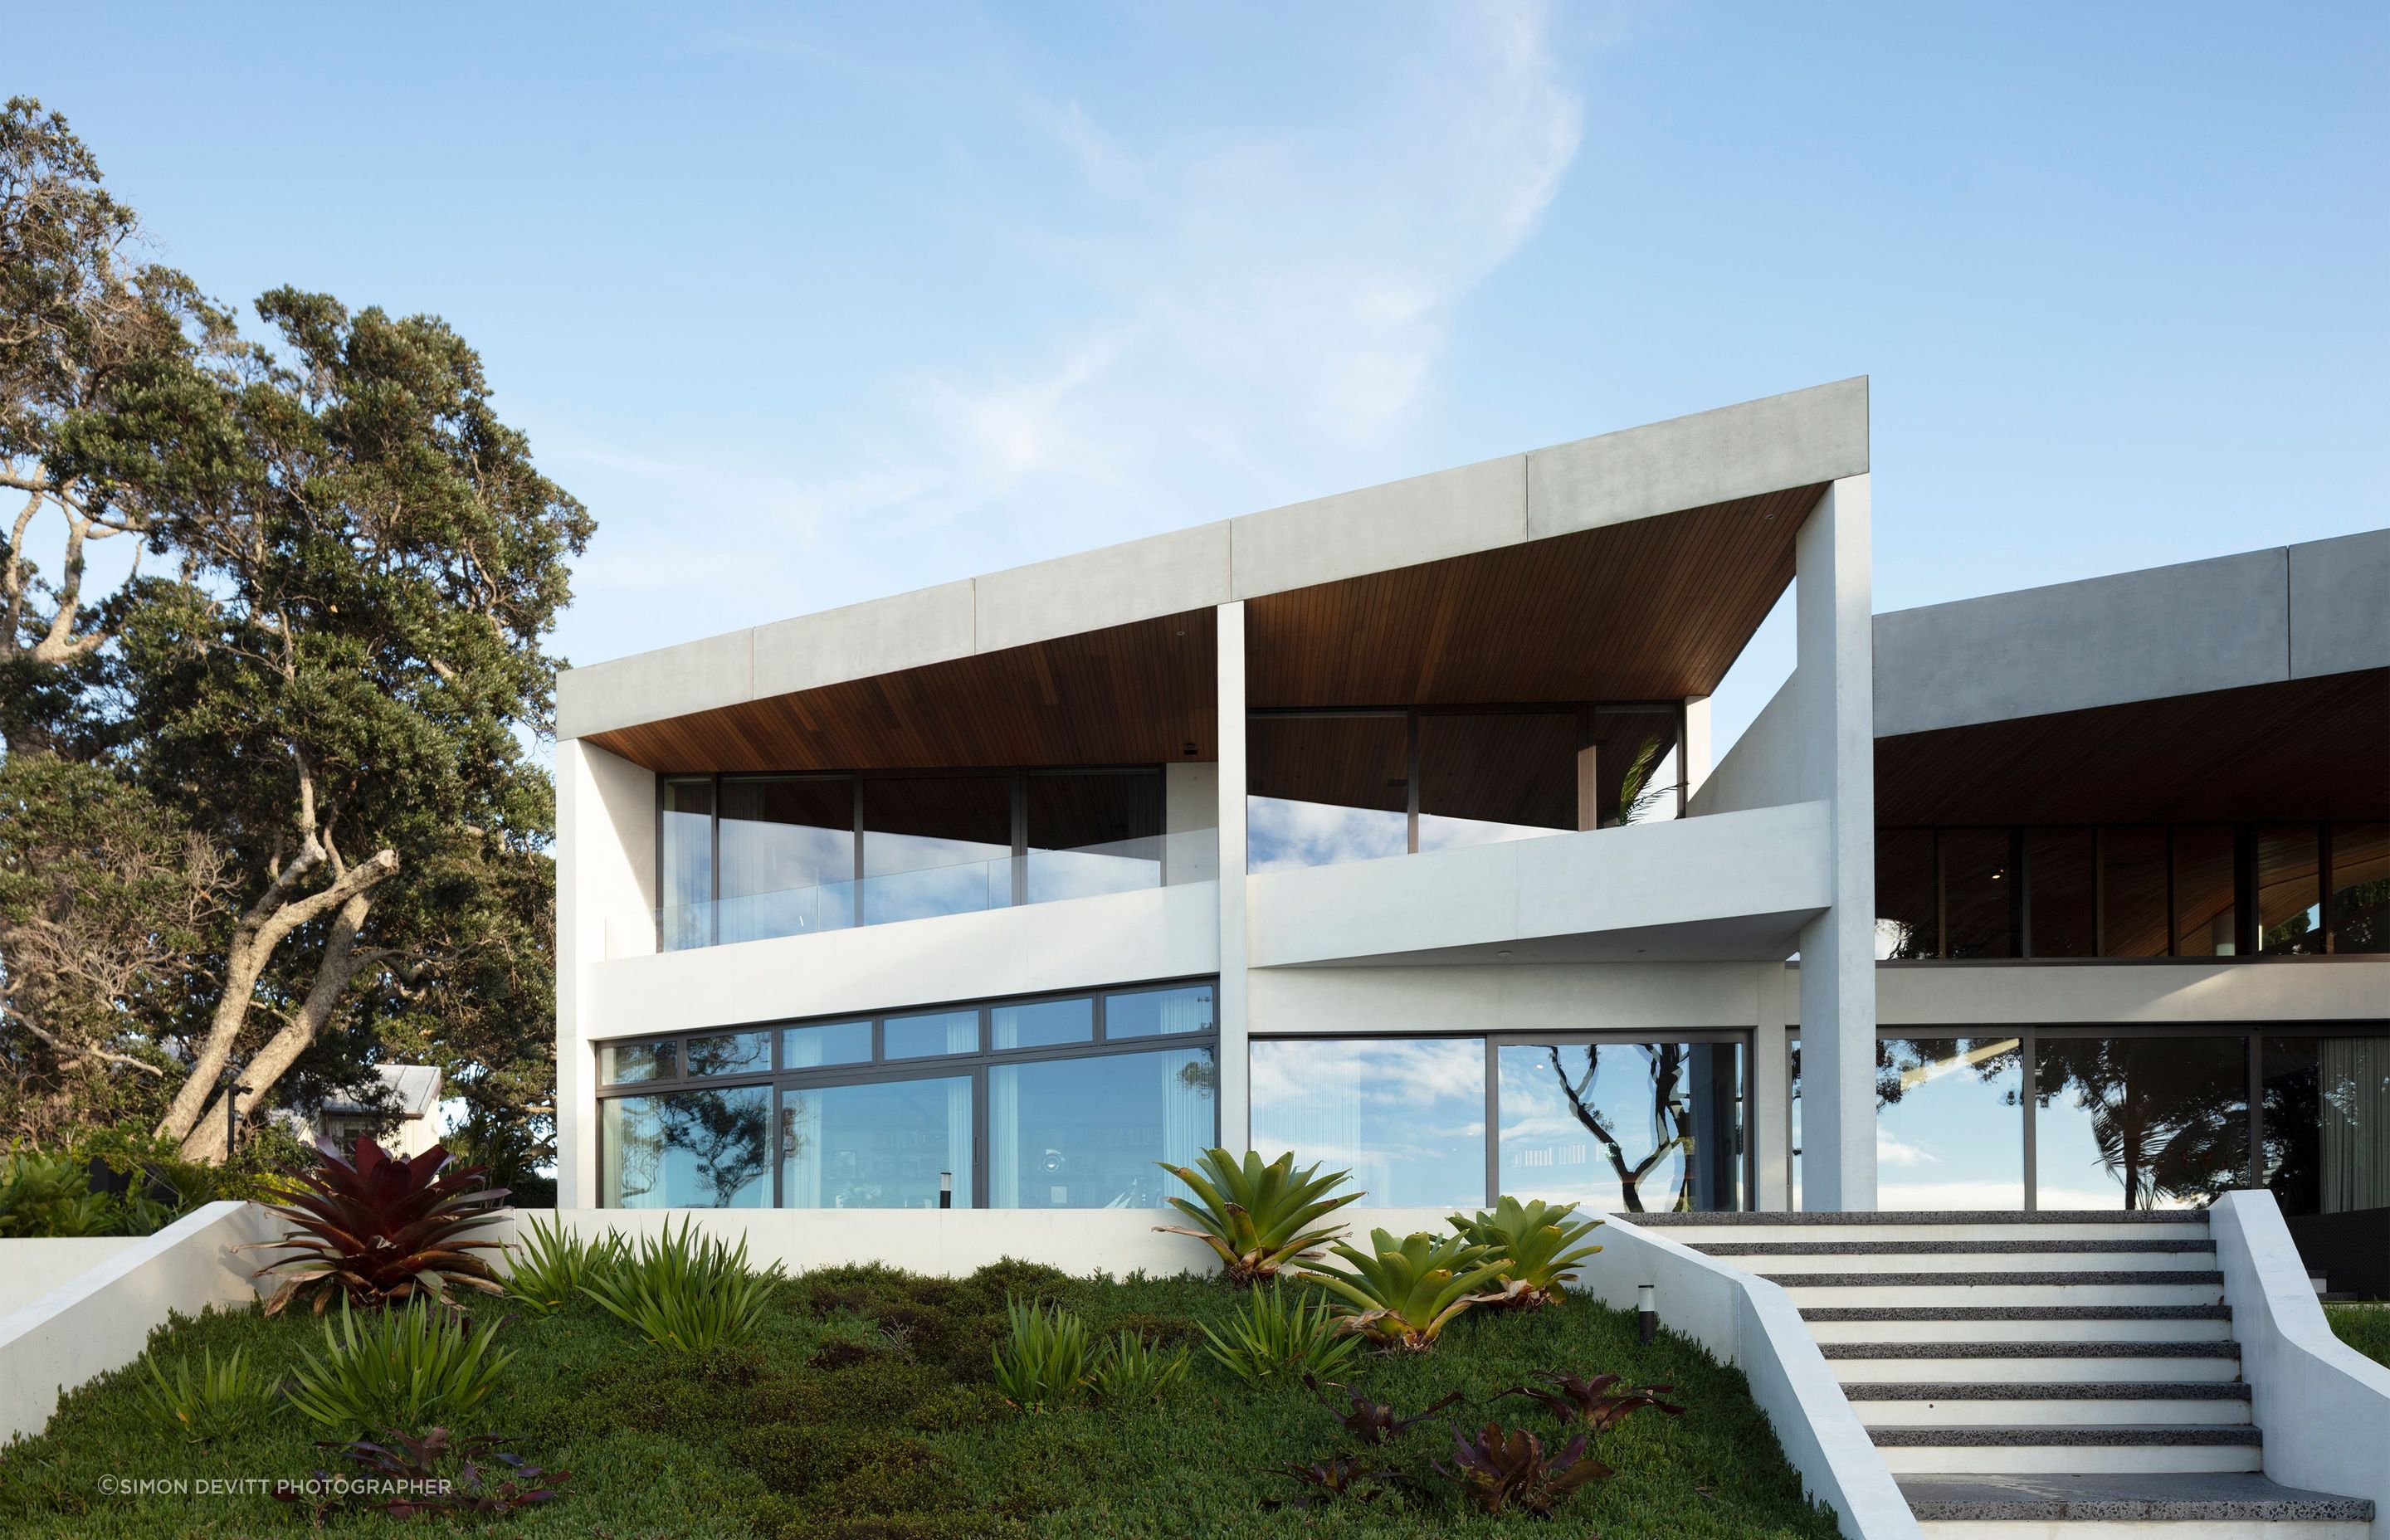 The Clifftops home by Bossley Architects connects beautifully to its site, through a sculptural beauty expressed through dyed white concrete forms.